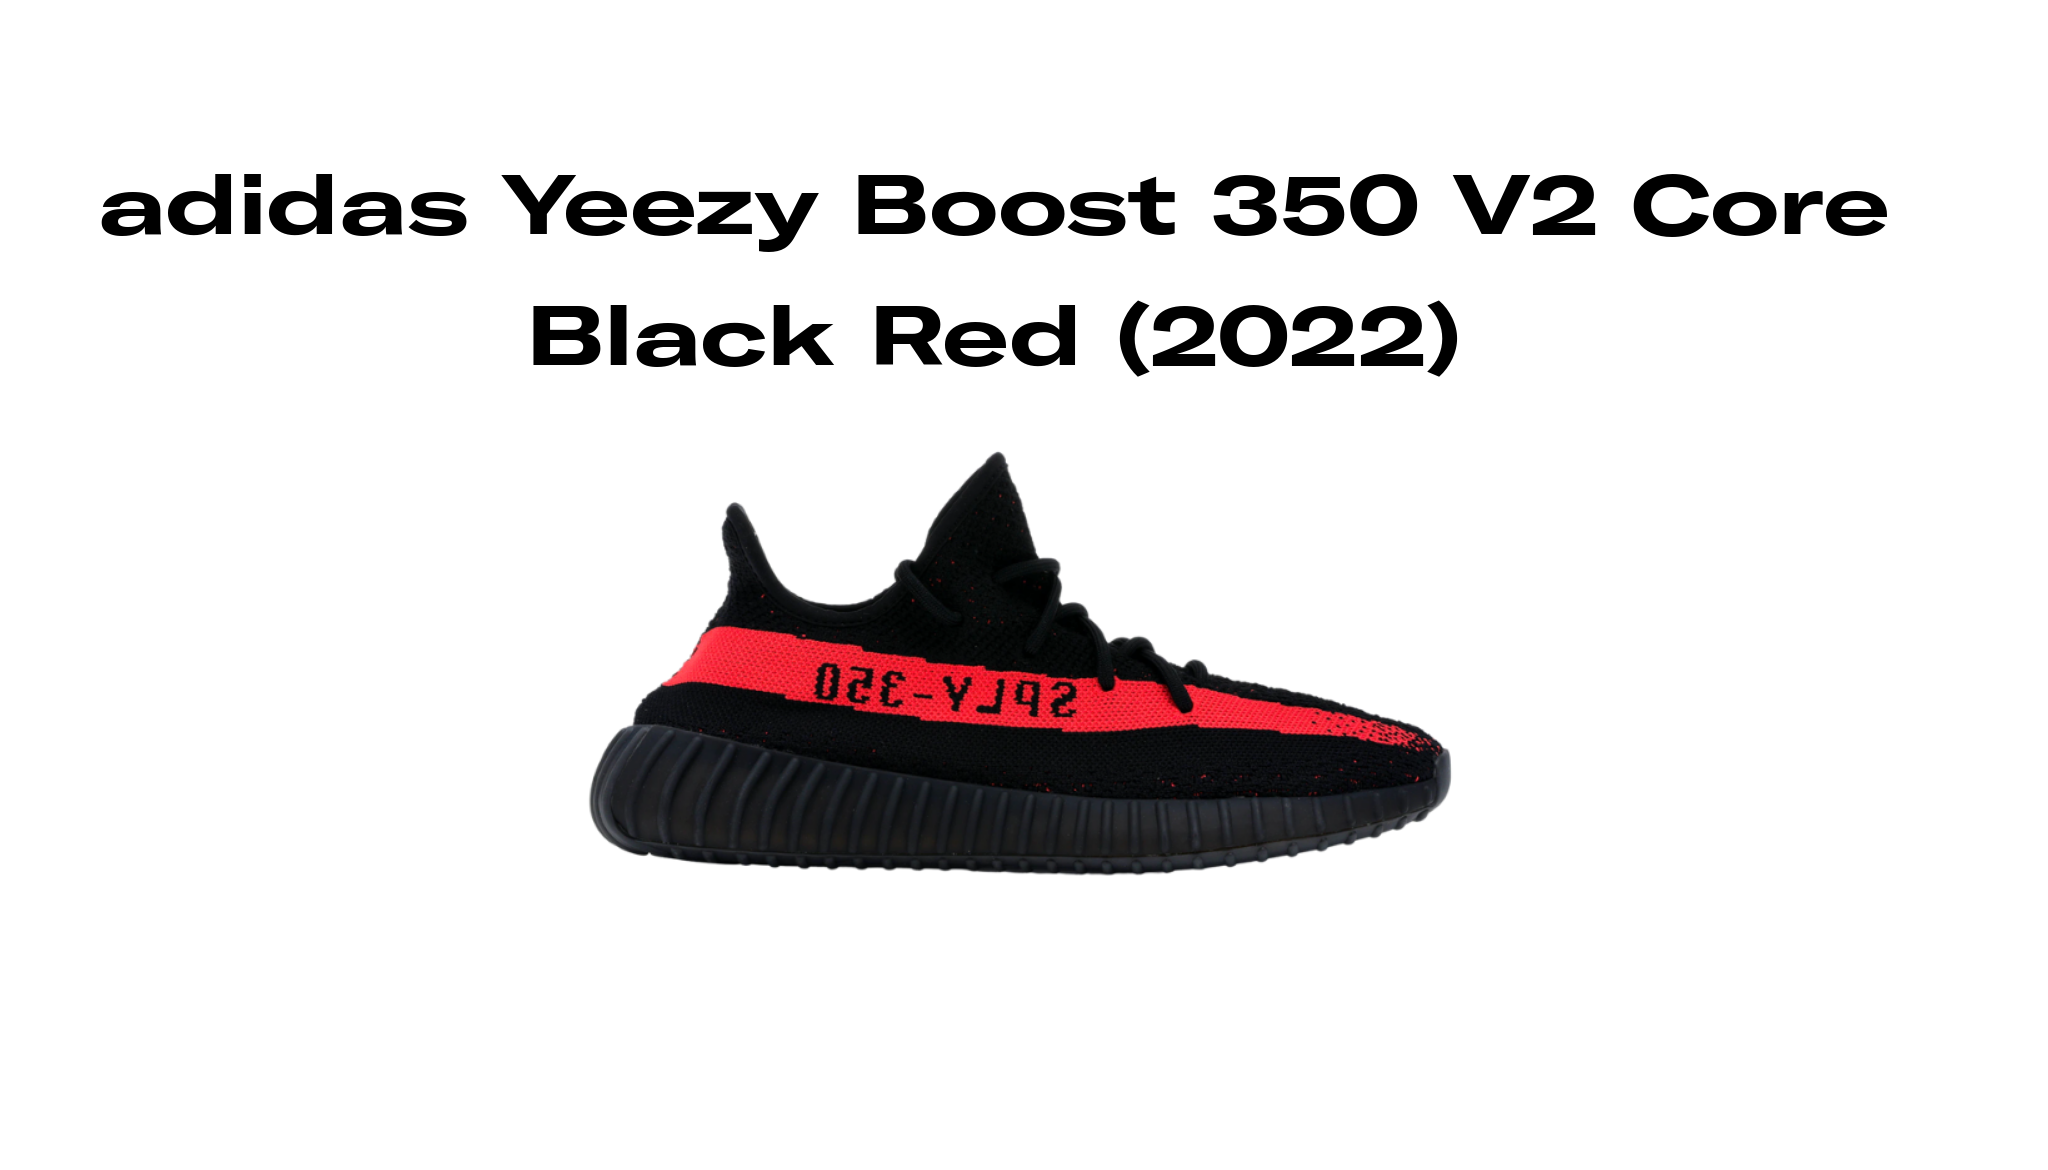 adidas Yeezy Boost 350 V2 Core Black Red (2022), Raffles and 